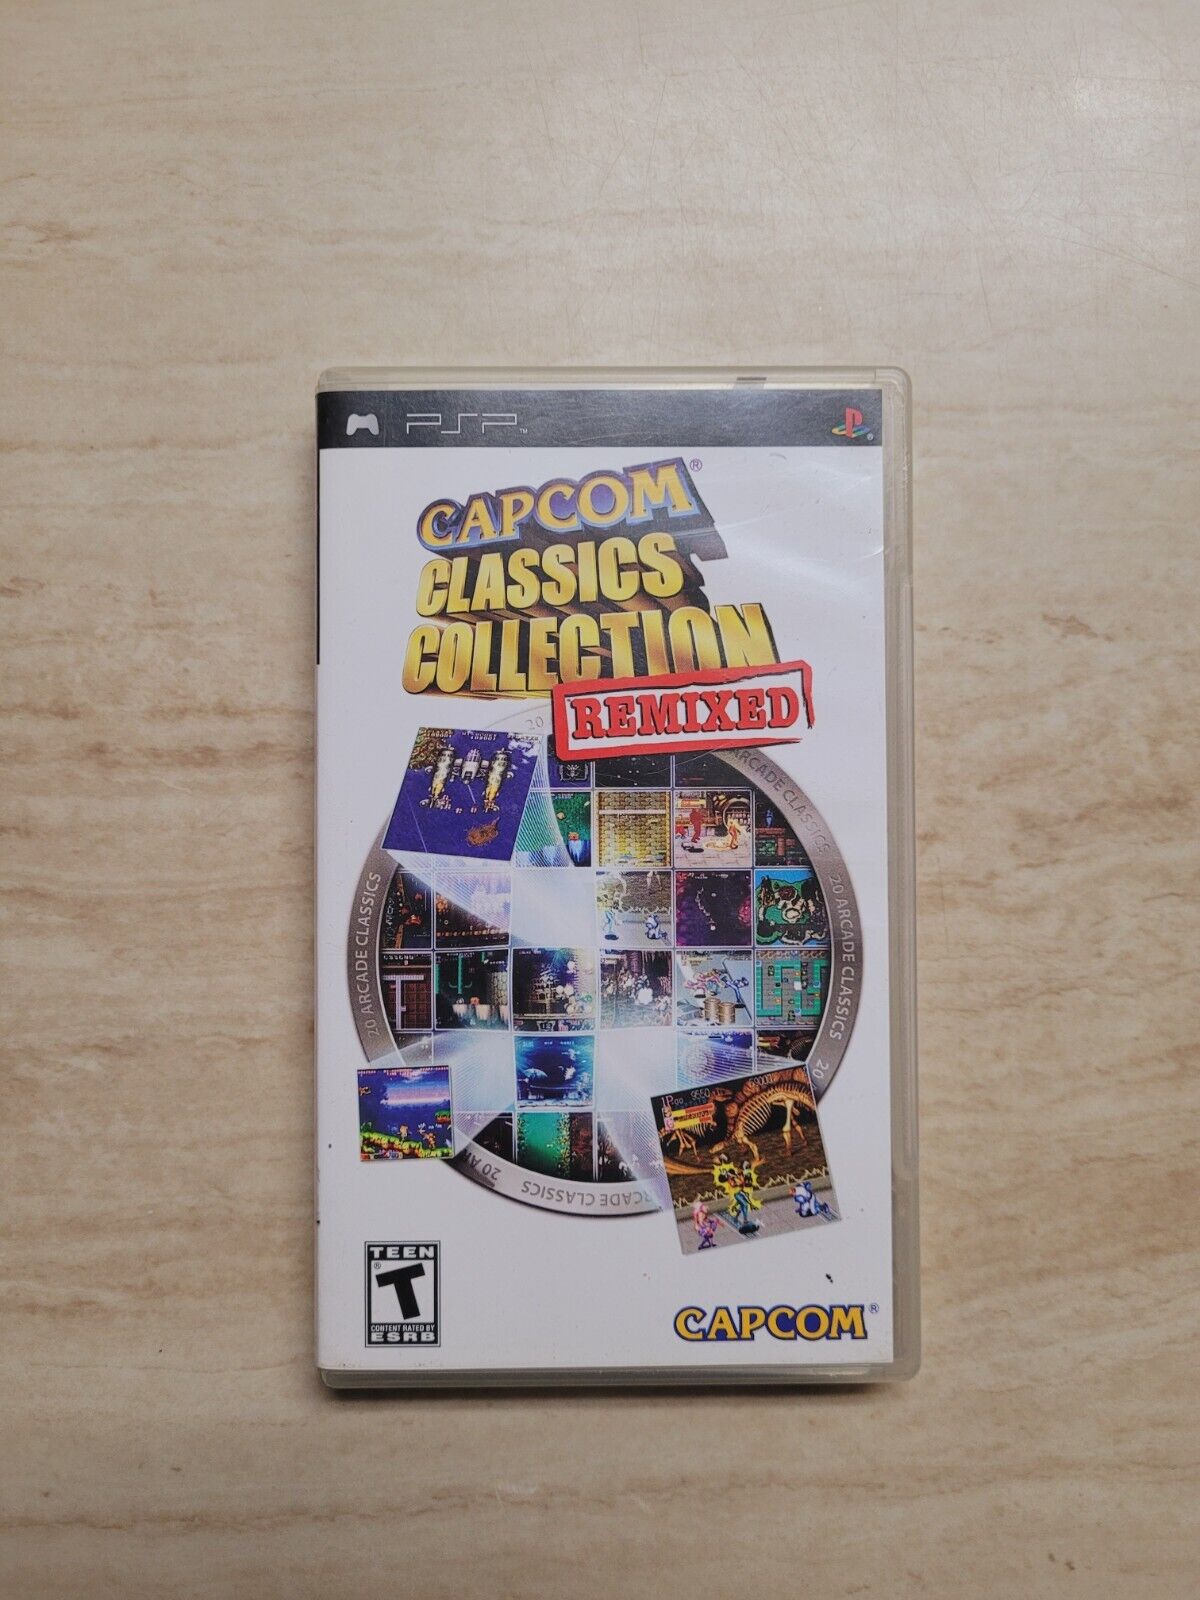 Capcom Classics Collection Remixed Sony PSP Complete 